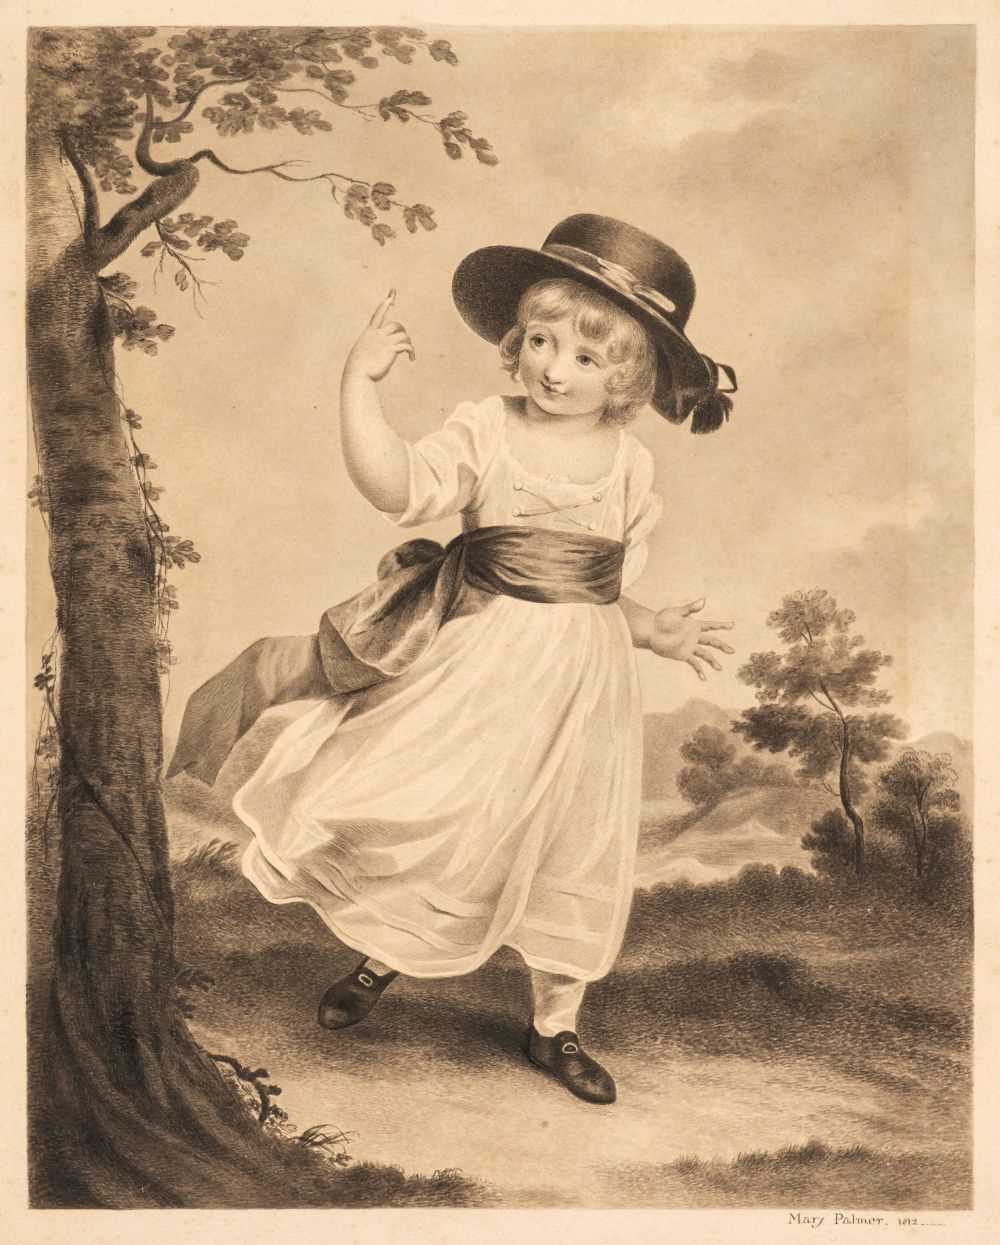 Lot 378 - Palmer (Mary, early 19th century). Young boy in hat ... skipping in a wooded landscape, 1812